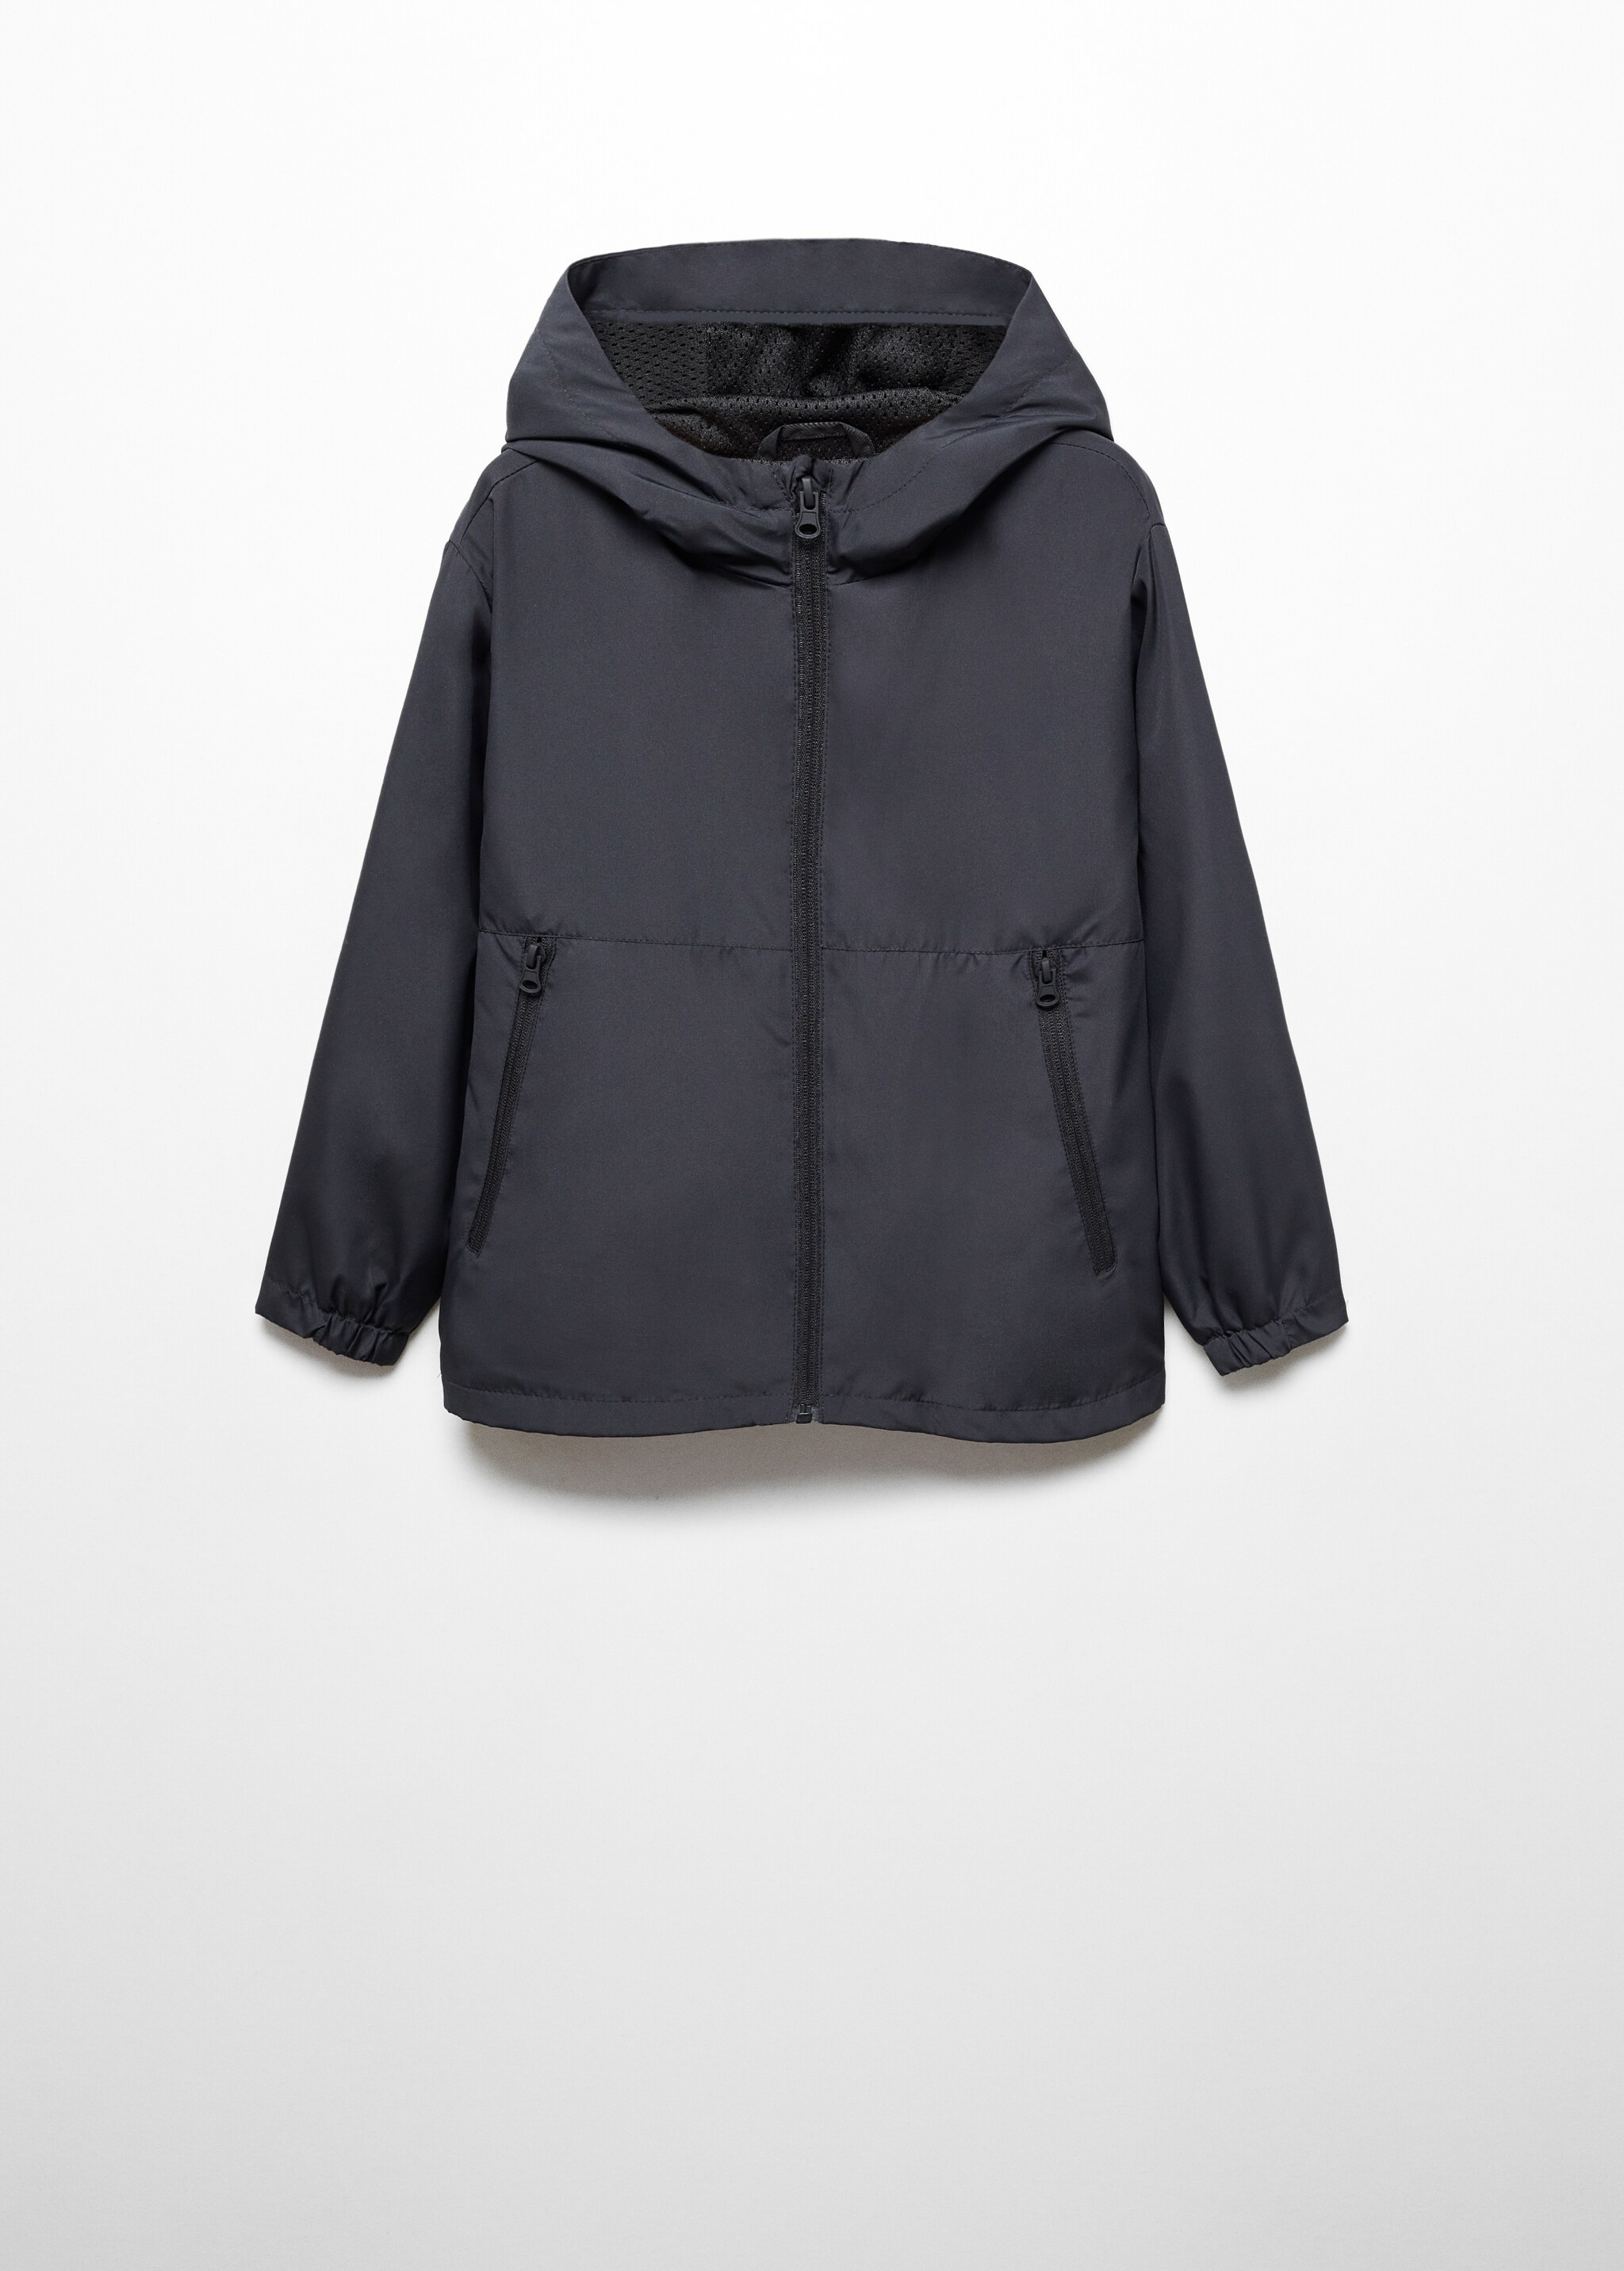 Hooded parka - Article without model